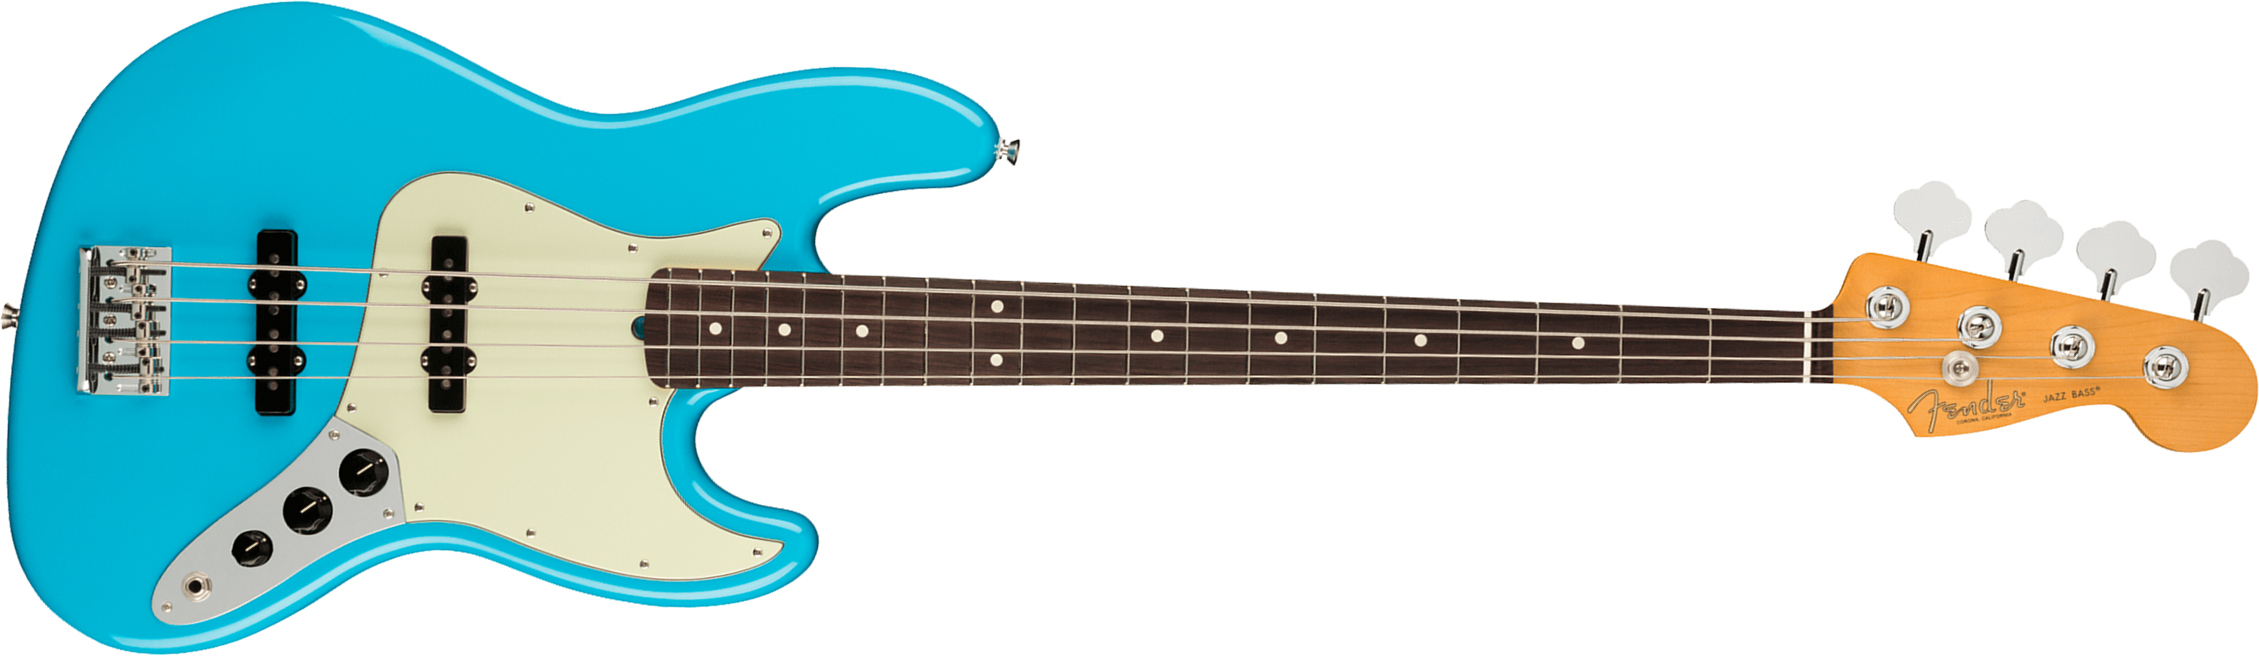 Fender Jazz Bass American Professional Ii Usa Rw - Miami Blue - Solid body electric bass - Main picture